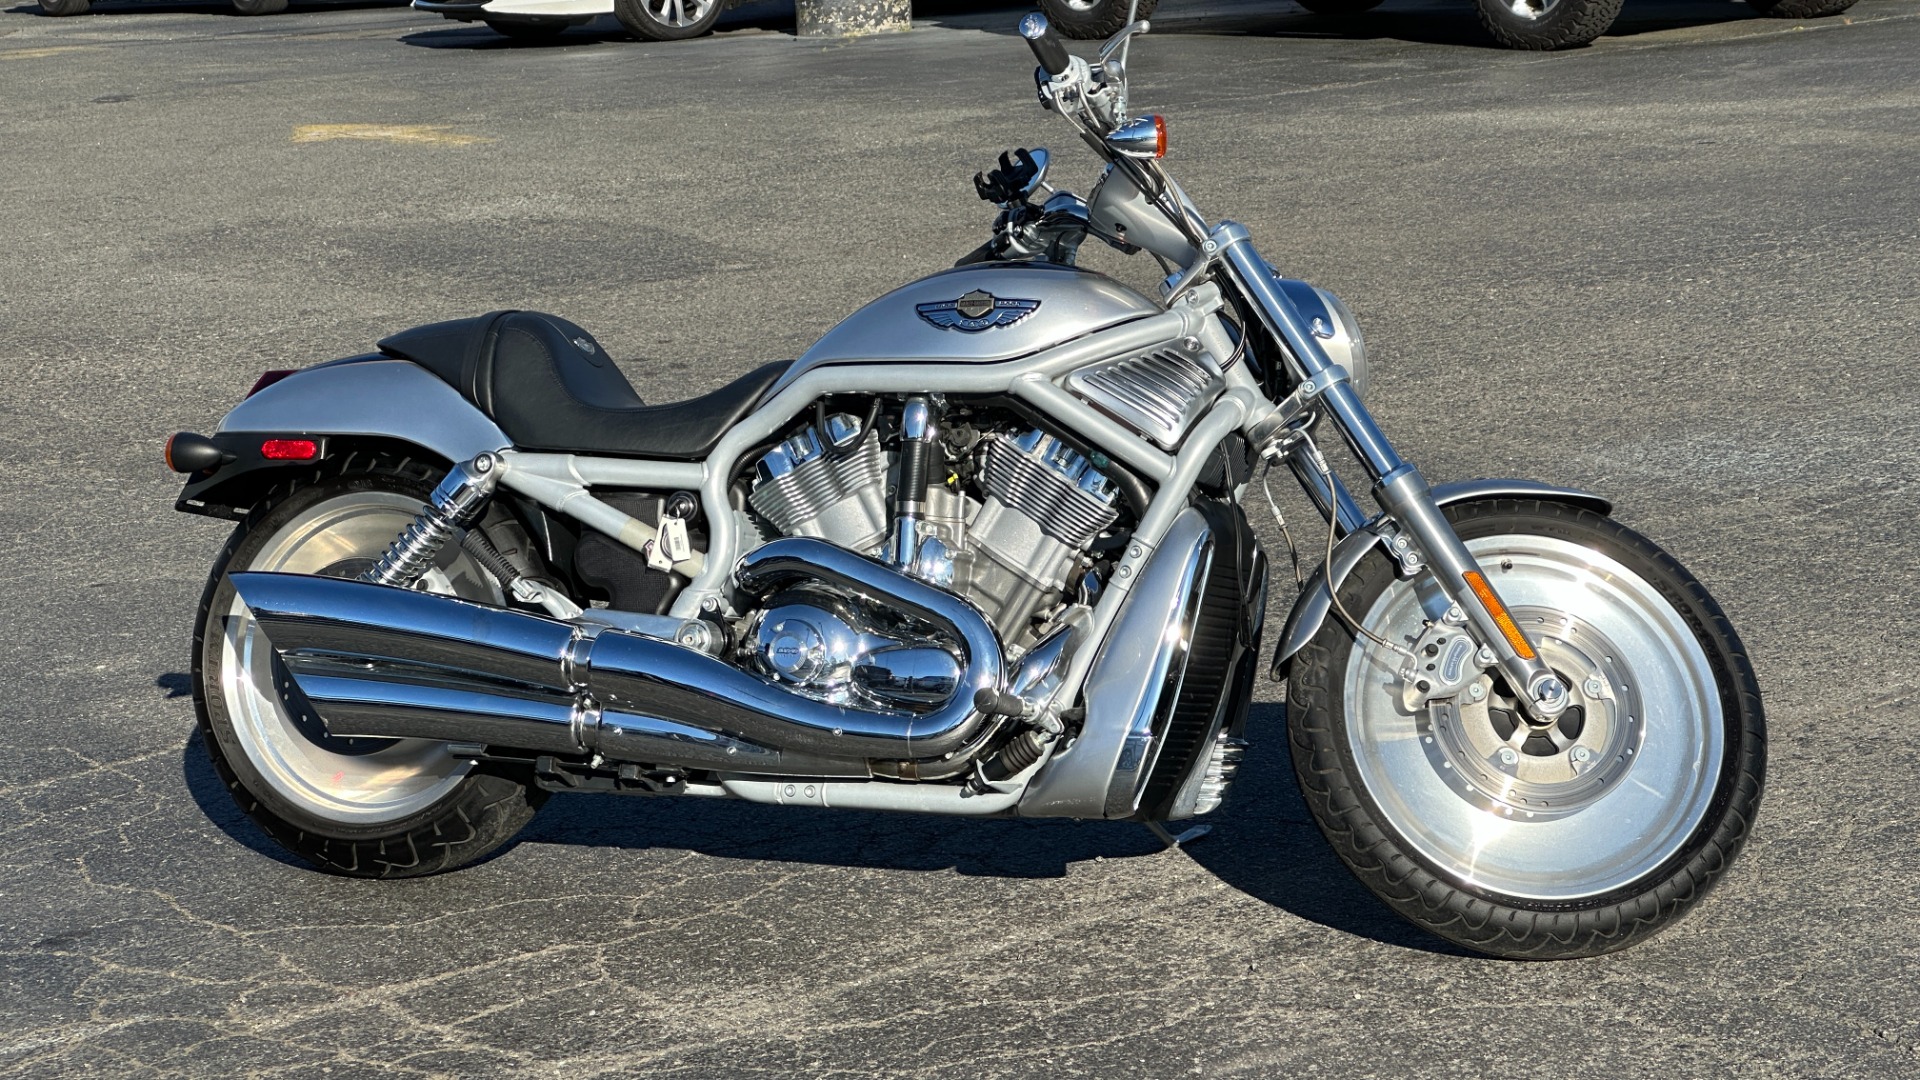 Used 2003 Harley Davidson V Rod ANNIVERSARY EDITION / 1130CC ENGINE / BREMBO BRAKES / VORTEX AIR SCOOPS for sale $7,695 at Formula Imports in Charlotte NC 28227 61